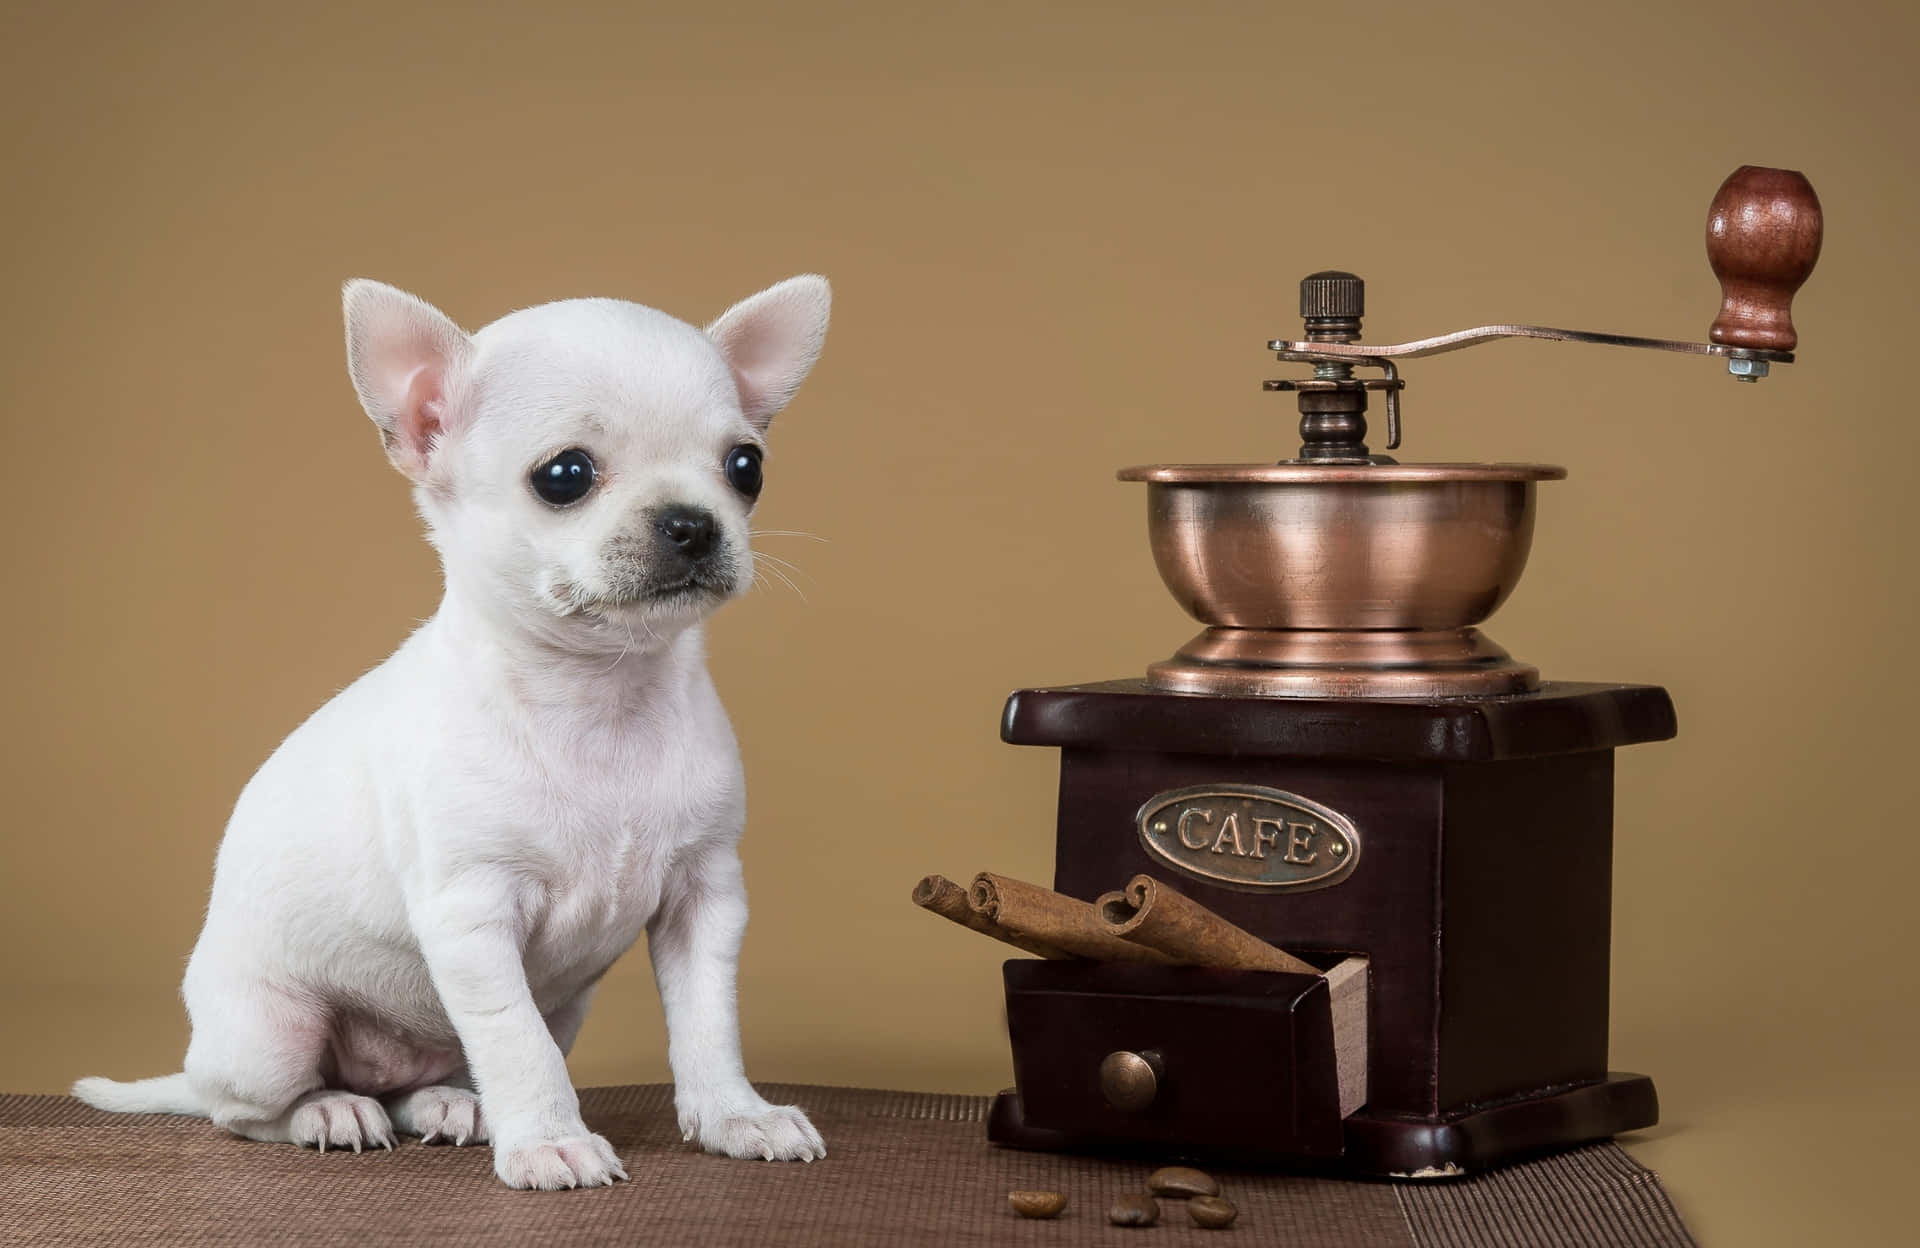 Teacup White Chihuahua Dog With Coffee Grinder Wallpaper